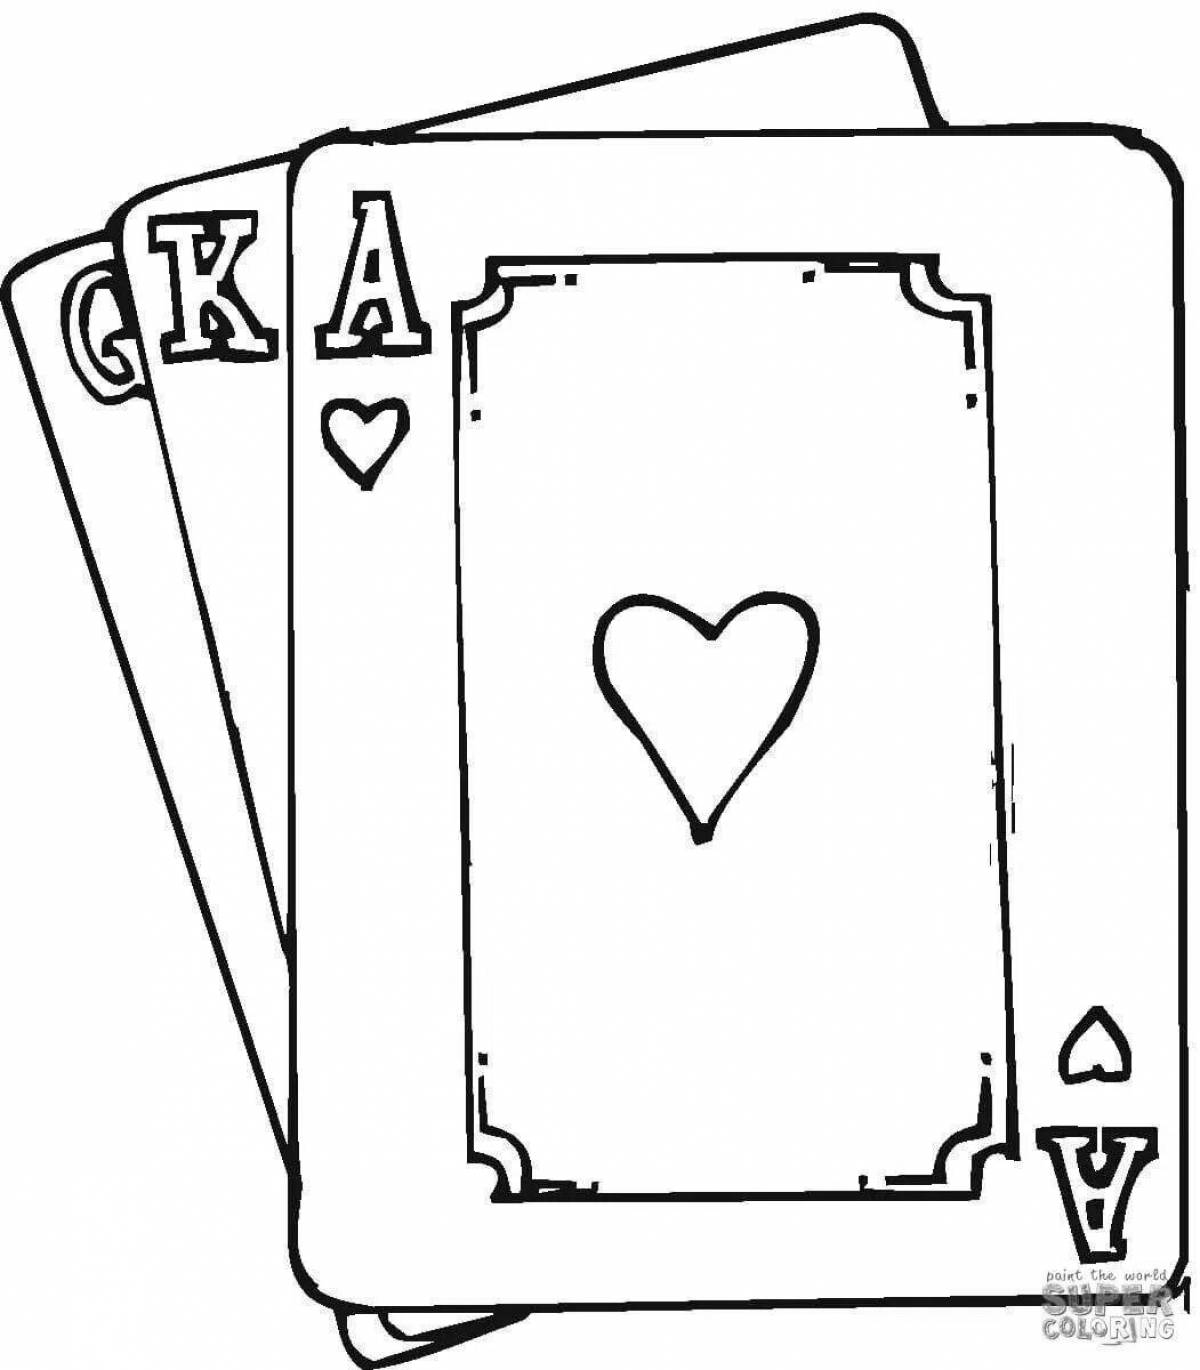 Colorful playing card coloring page